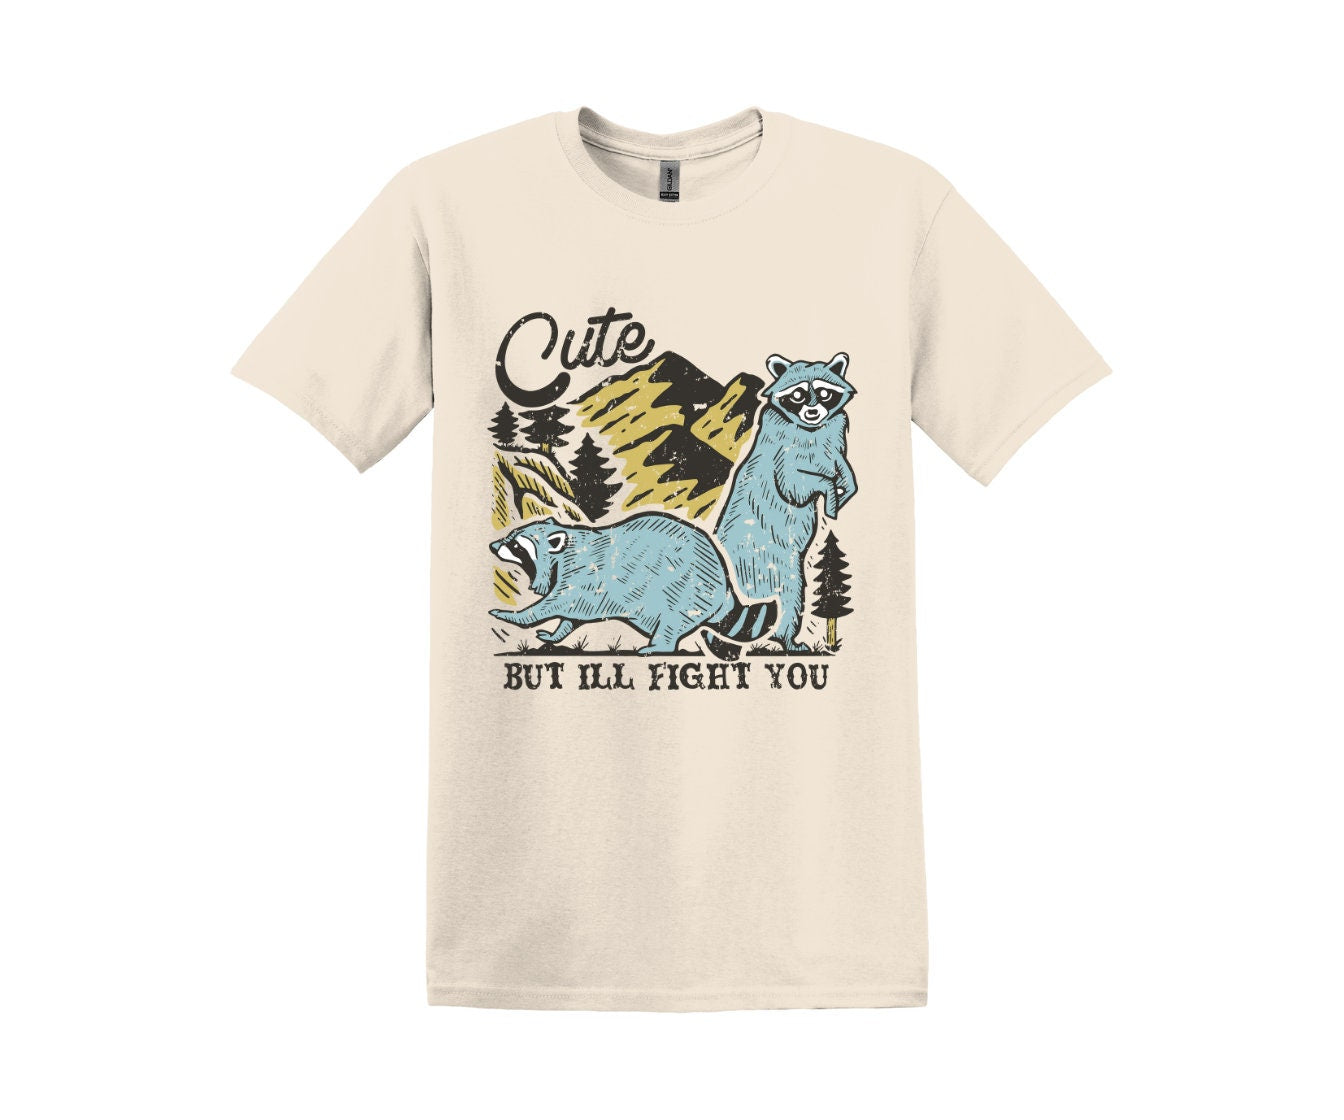 Cute But I'll  Fight You Racoon Tee, Funny T-Shirt, Adult Tee